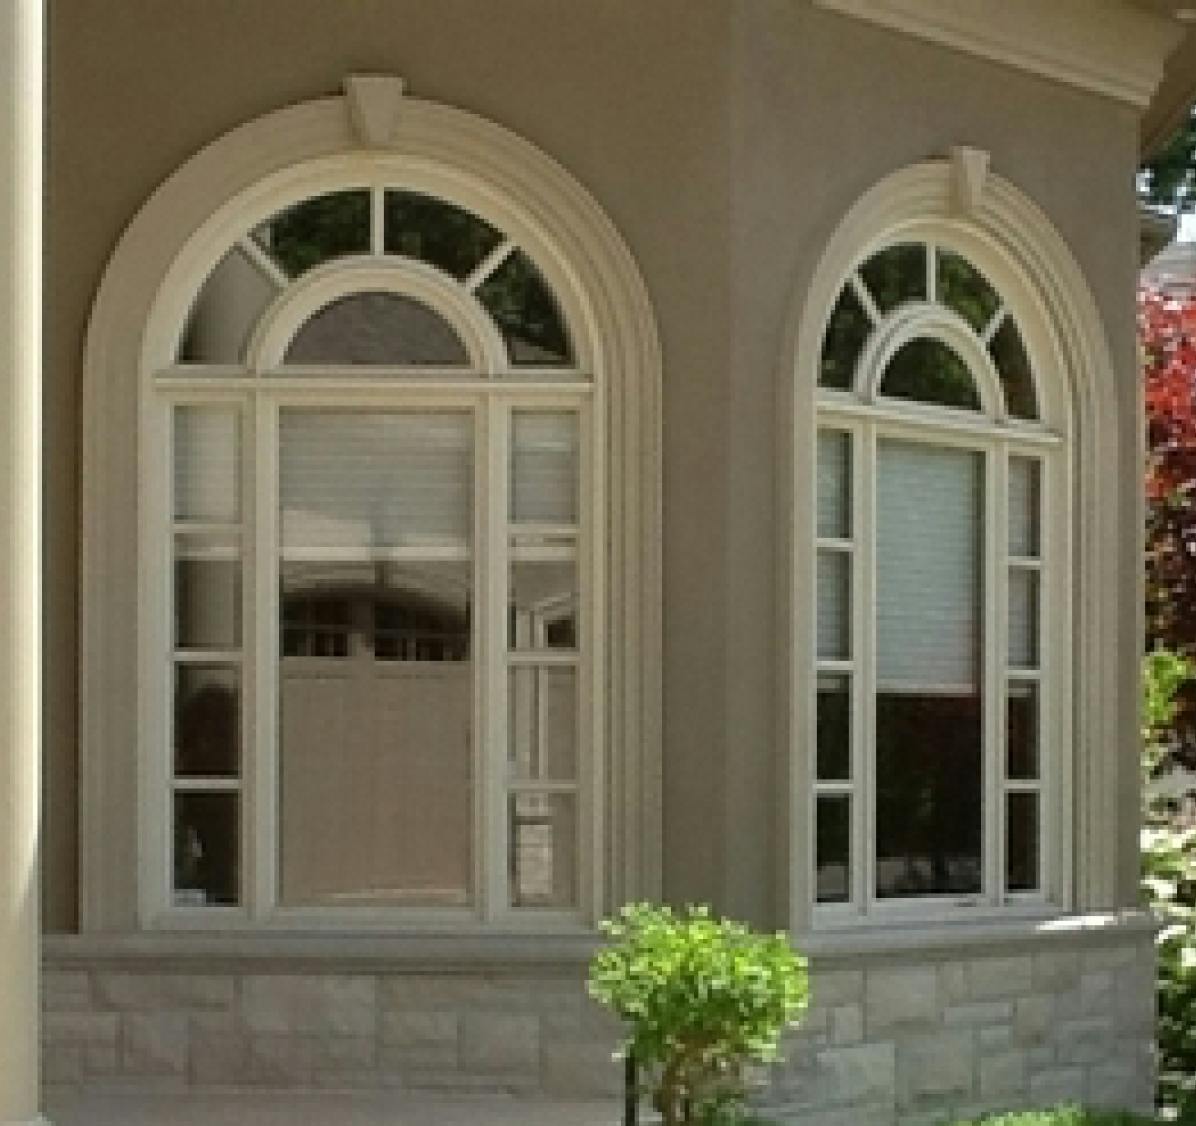 Camwood arched windows